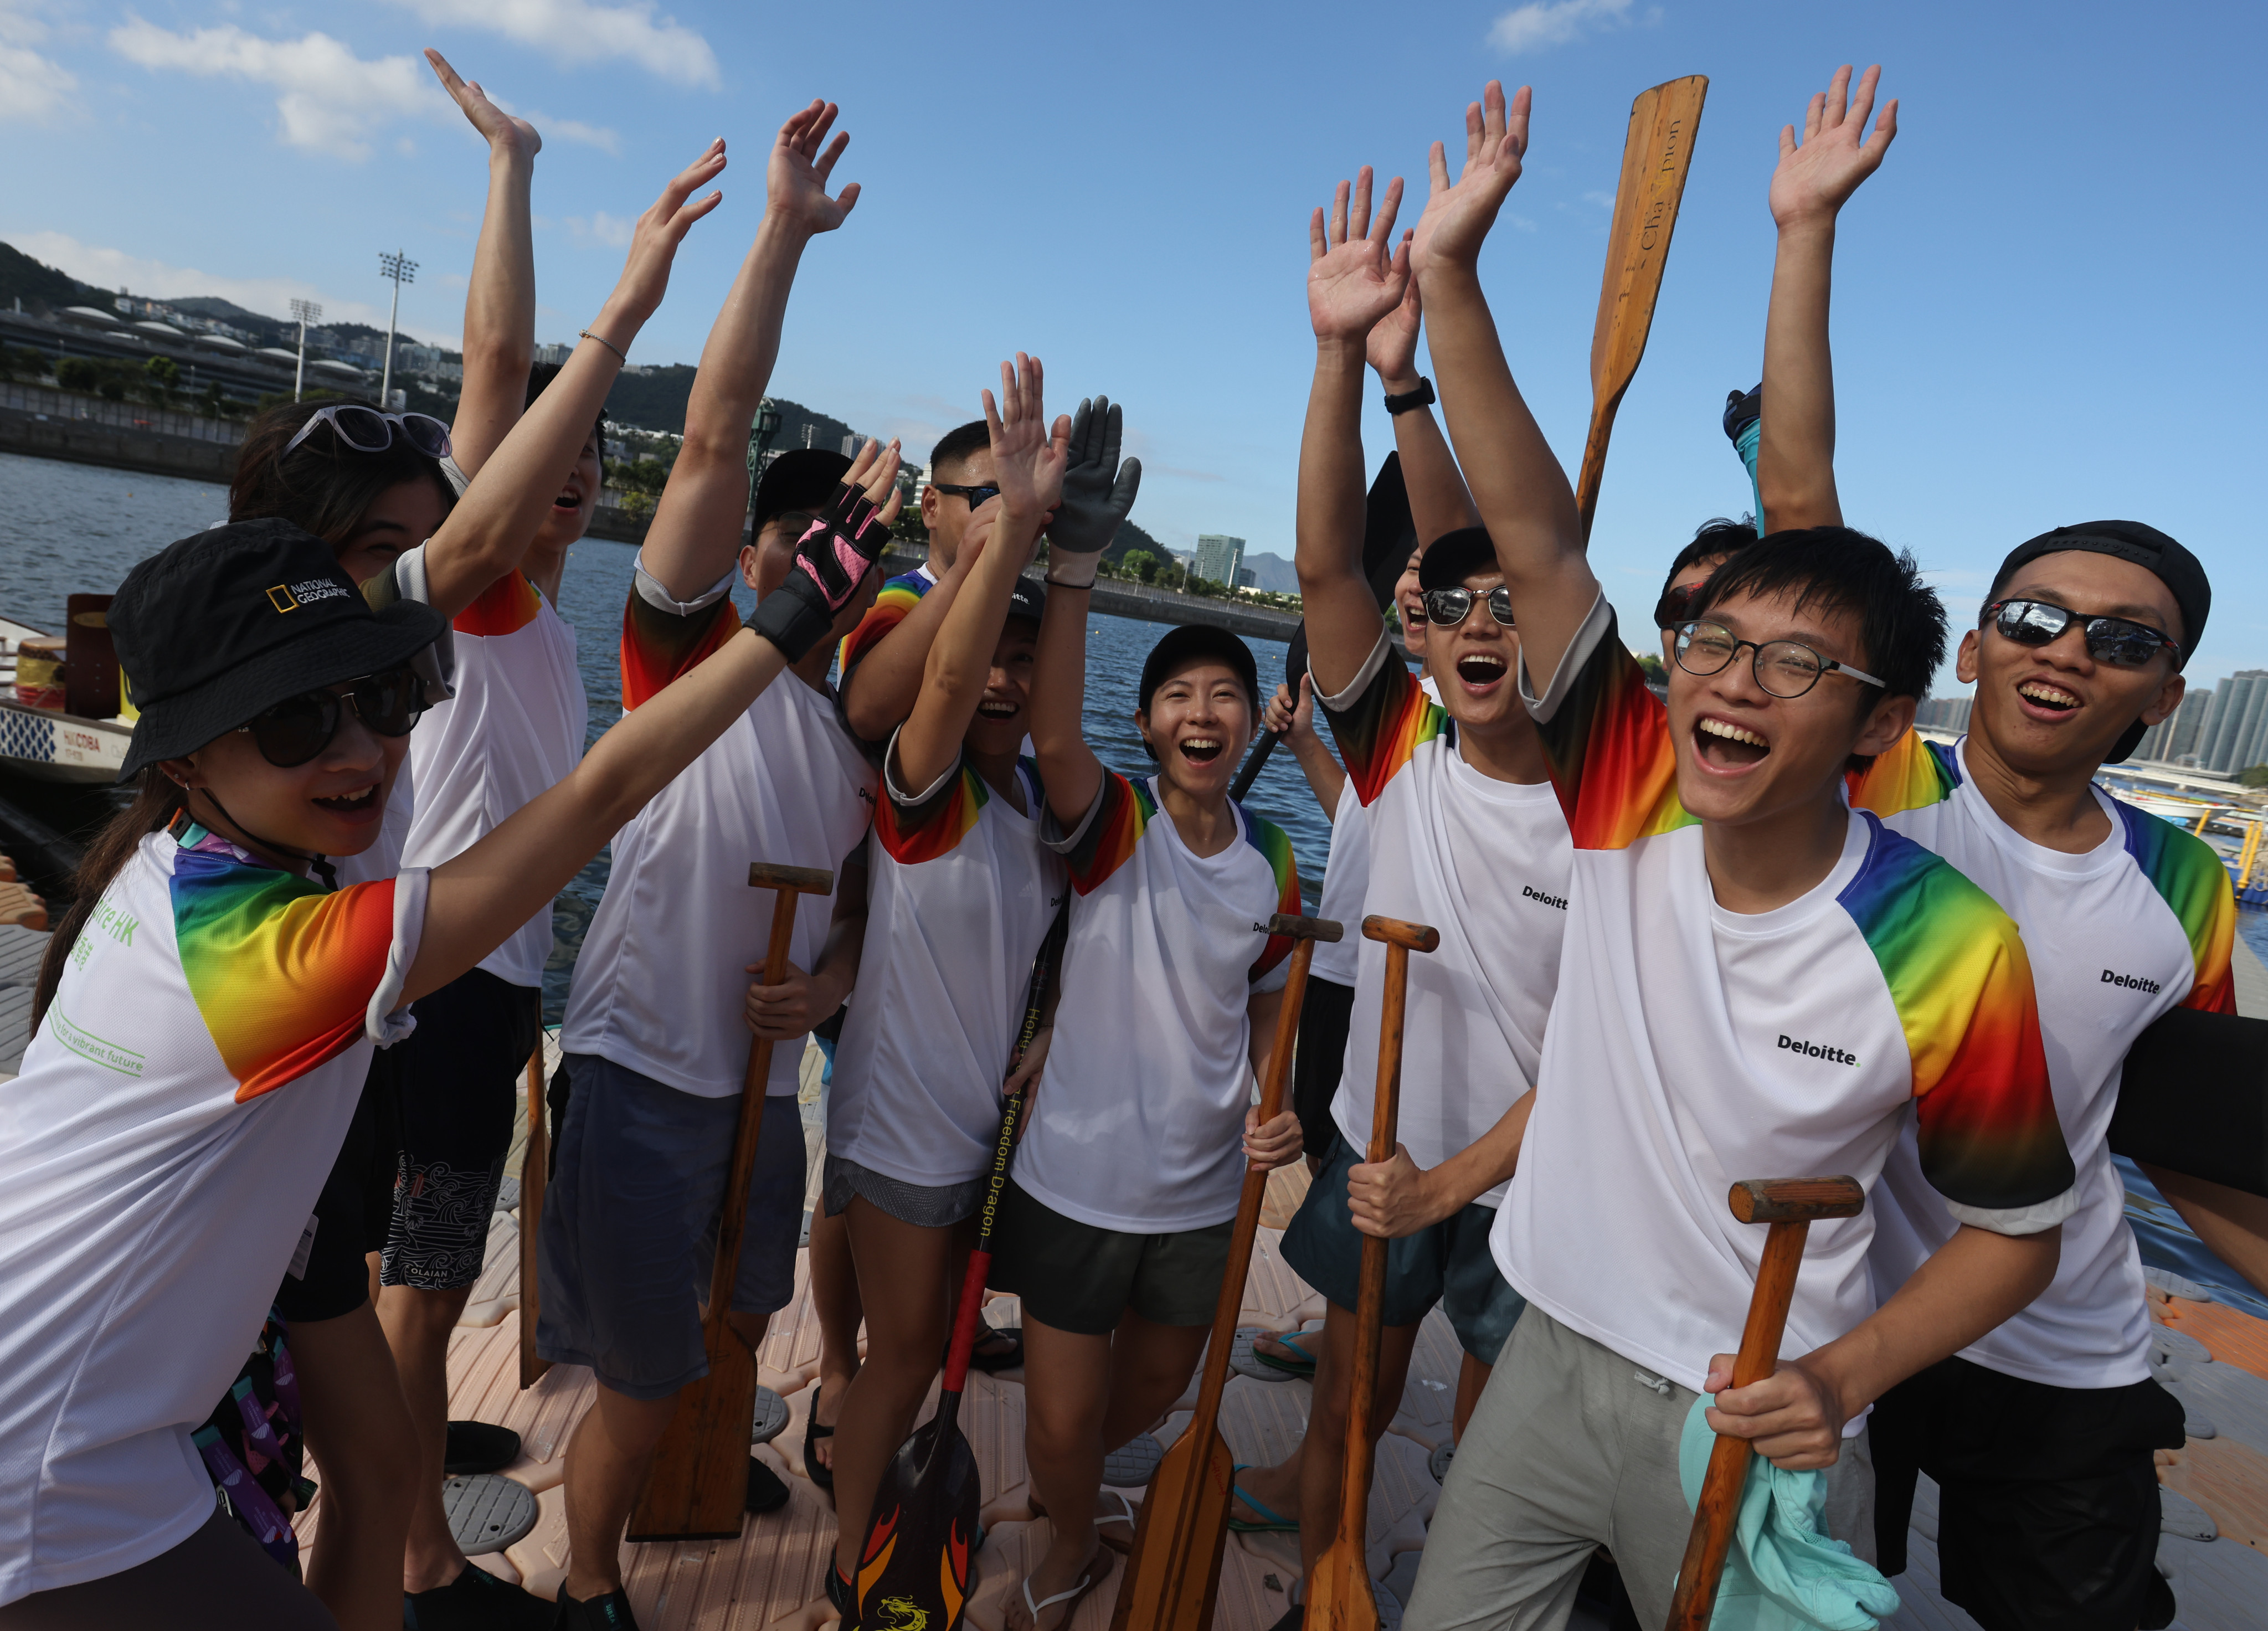 A scene from the Gay Games Hong Kong 2023 dragon boat races on the Shing Mun River in Sha Tin. Hong Kong missed an opportunity to promote its diversity, tolerance and inclusion because a minority of bigots railed against its hosting of the games. Photo: Jonathan Wong